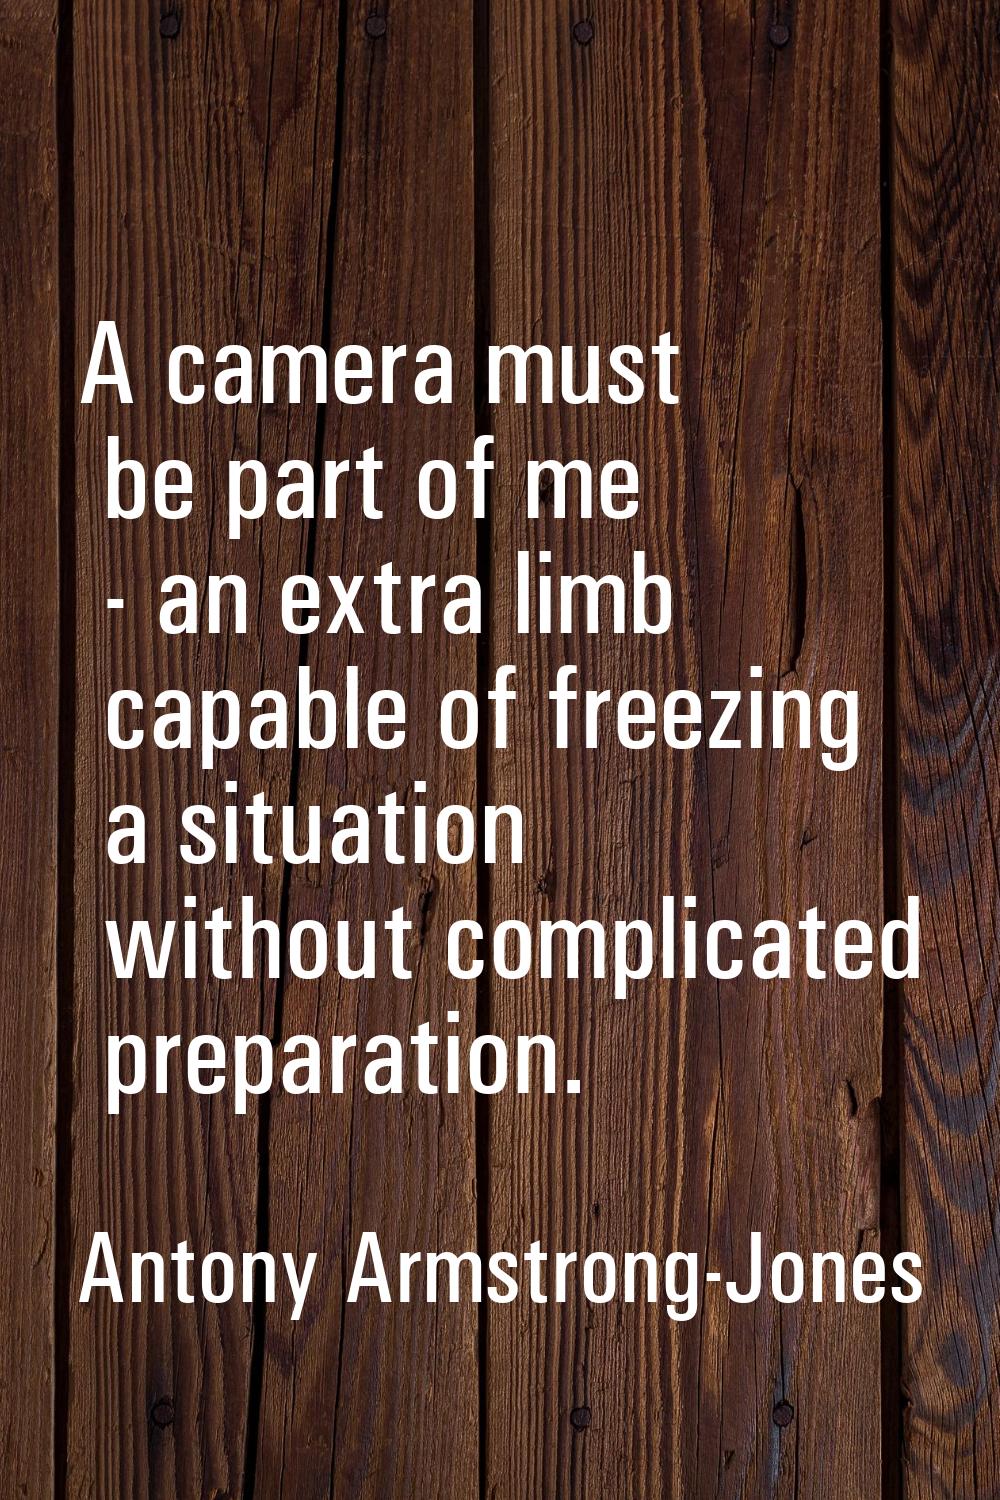 A camera must be part of me - an extra limb capable of freezing a situation without complicated pre